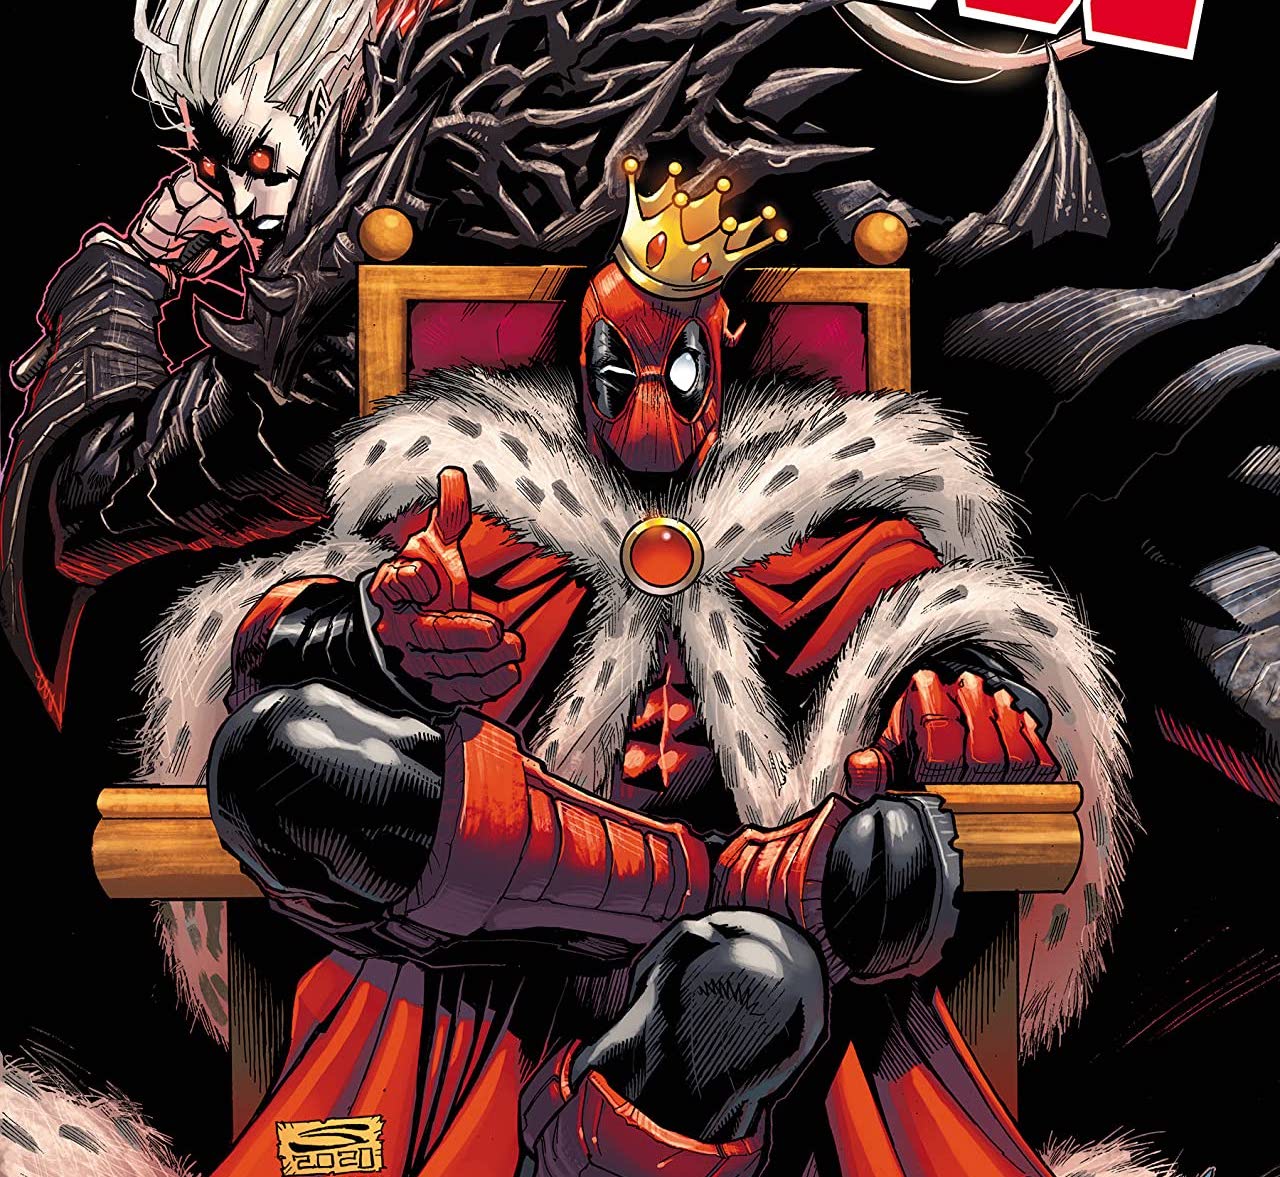 'King Deadpool Vol. 2' is an entertaining respite from your everyday life